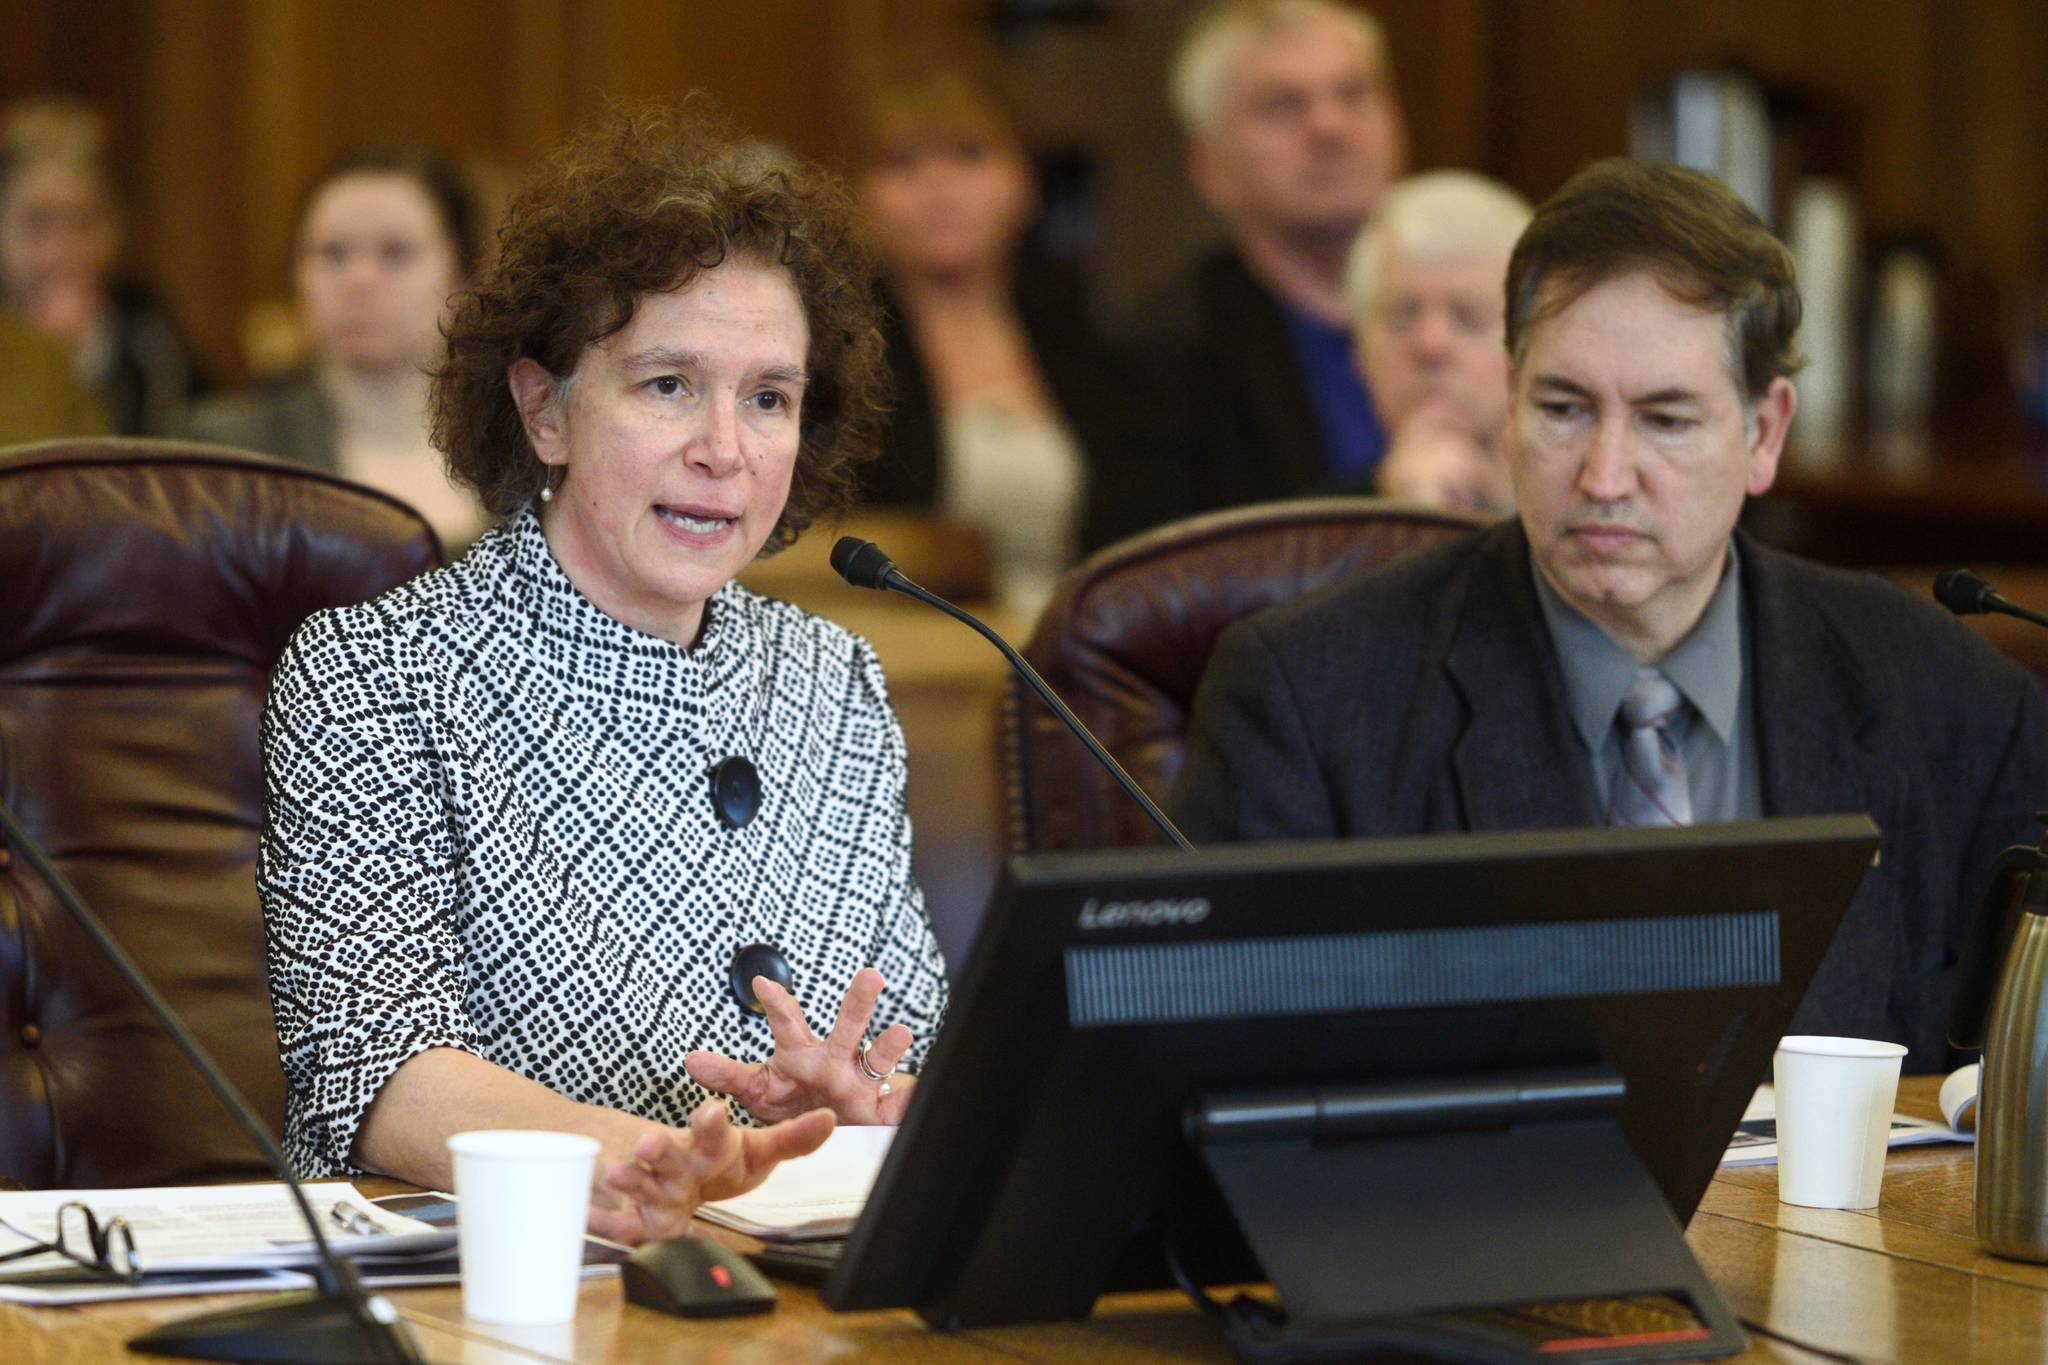 Susan Bell, of the McDowell Group, and Robert Venables, executive director of Southeast Conference, present information about the Alaska Marine Highway Systems during an information meeting for House members at the Capitol on Tuesday, Feb. 5, 2019. (Michael Penn | Juneau Empire)